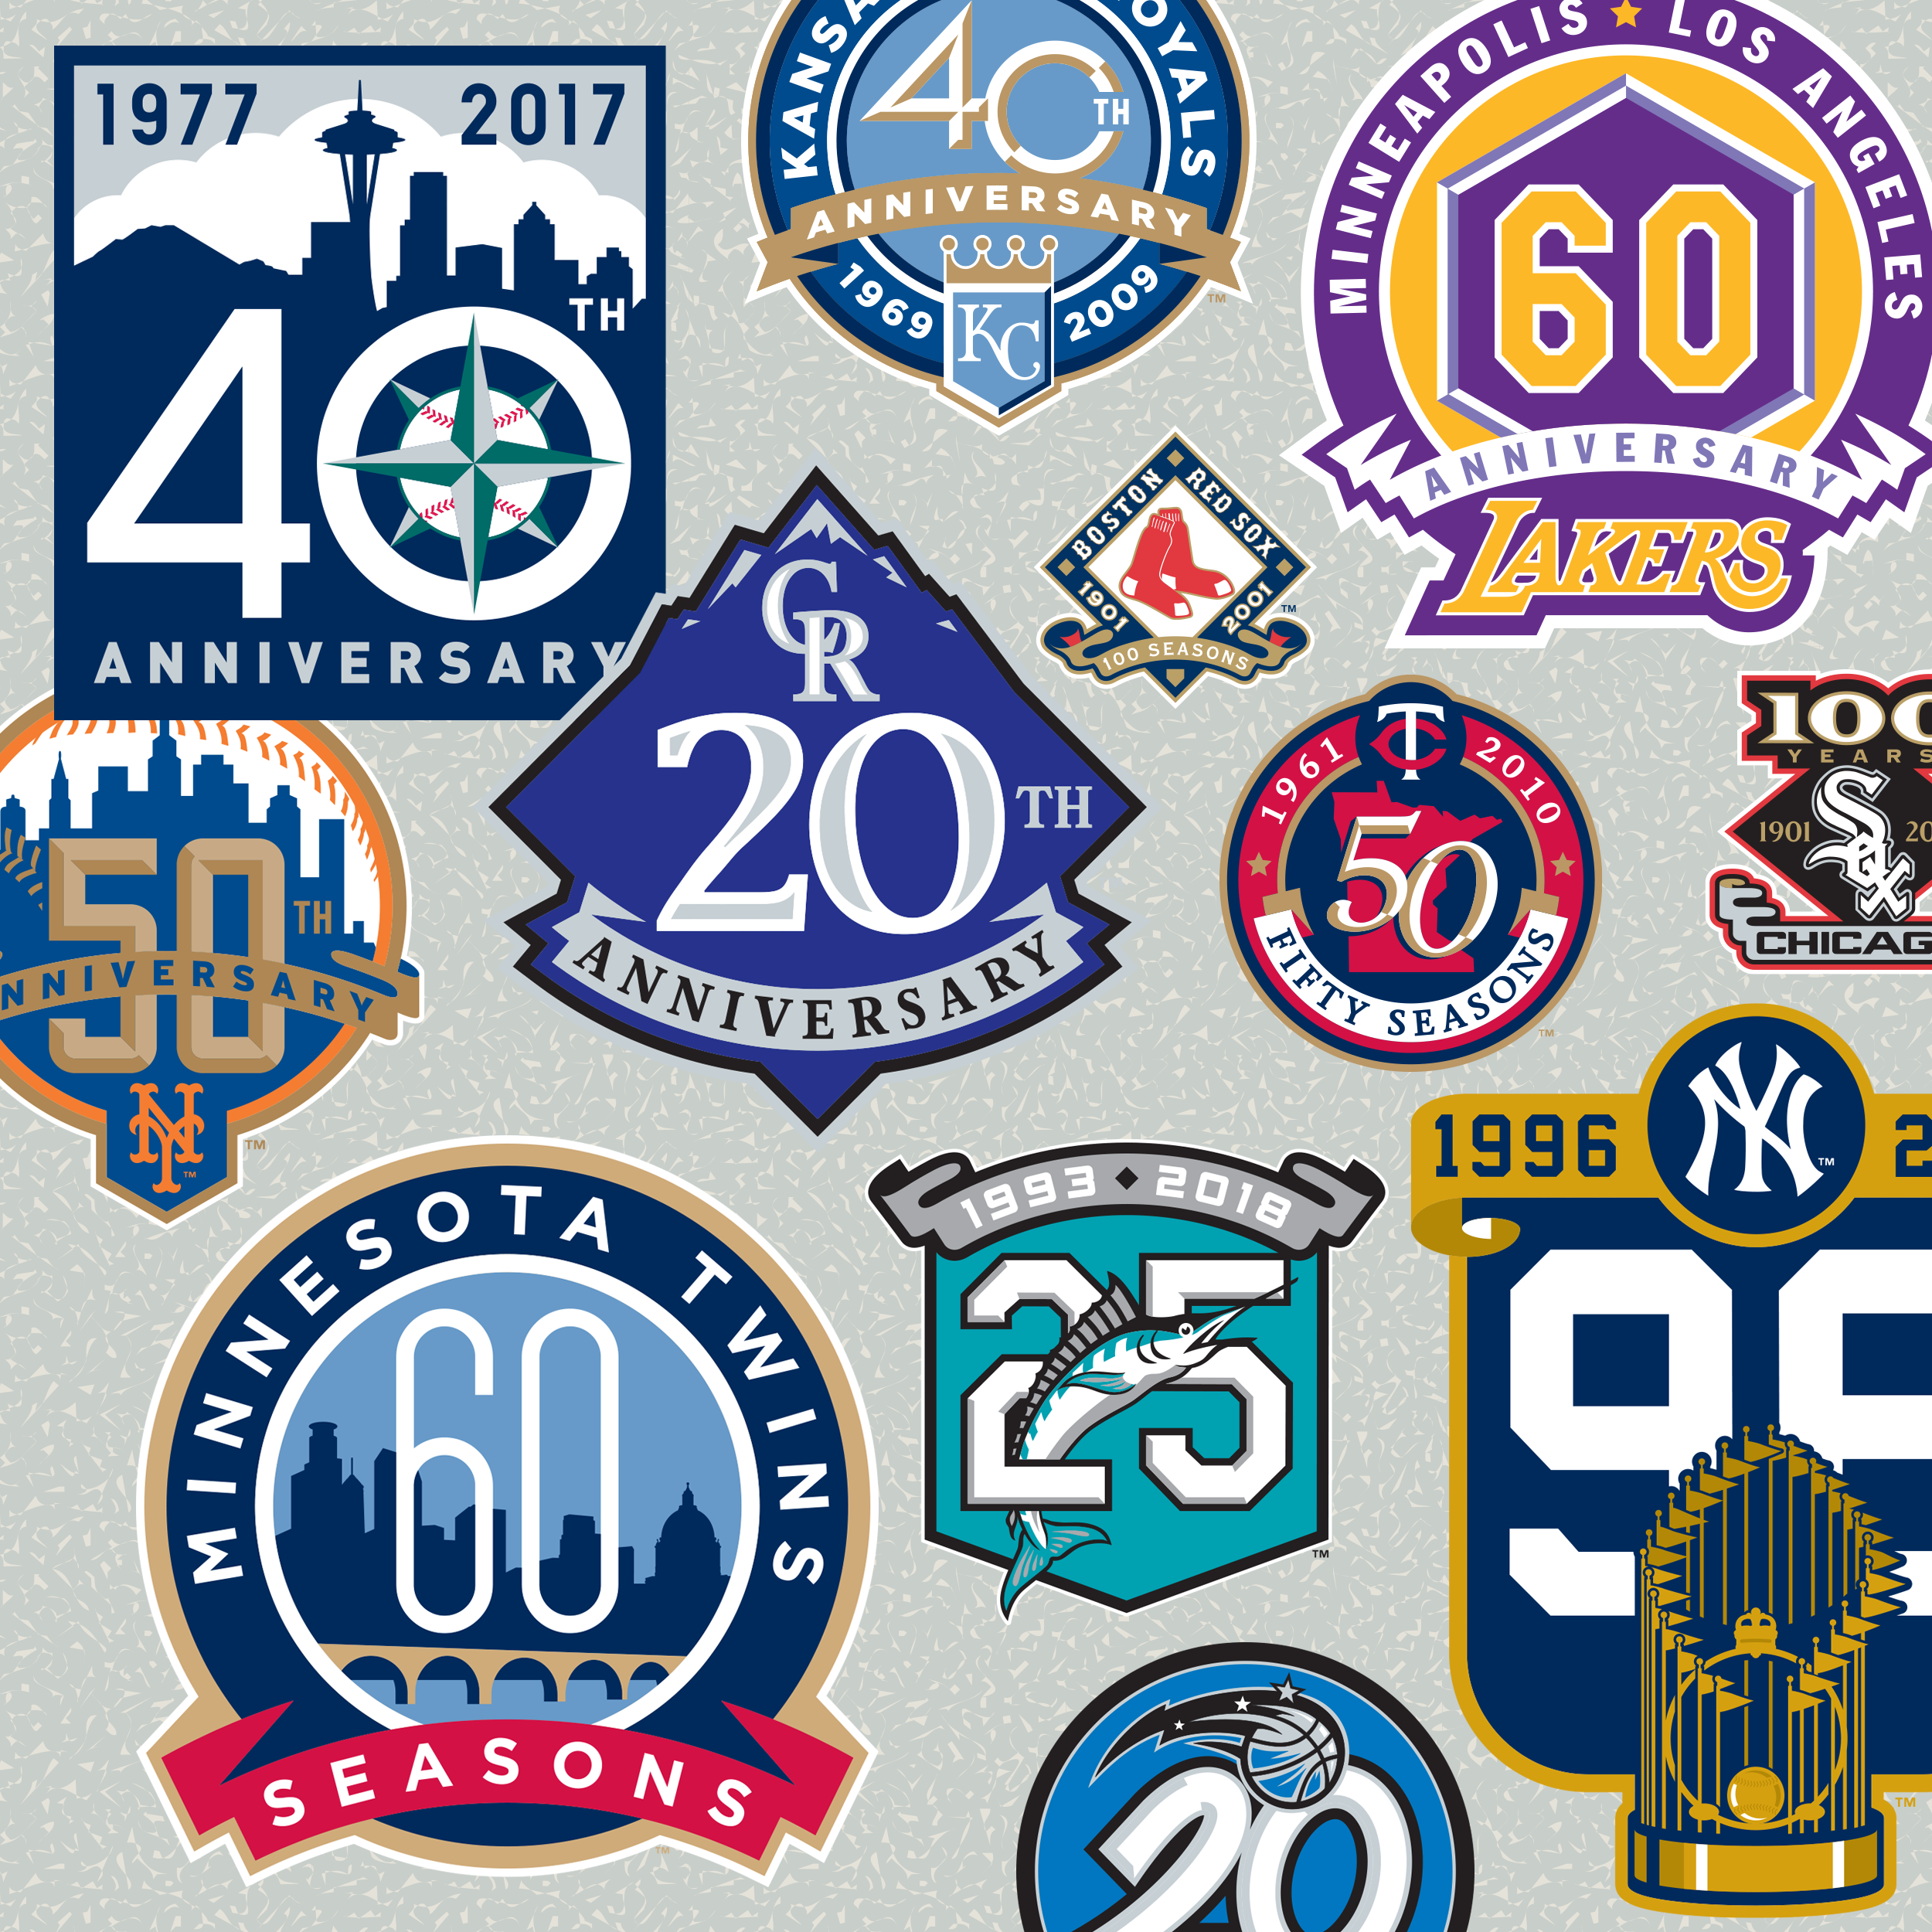 The Many Uniforms of the 2013 Brewers — Todd Radom Design